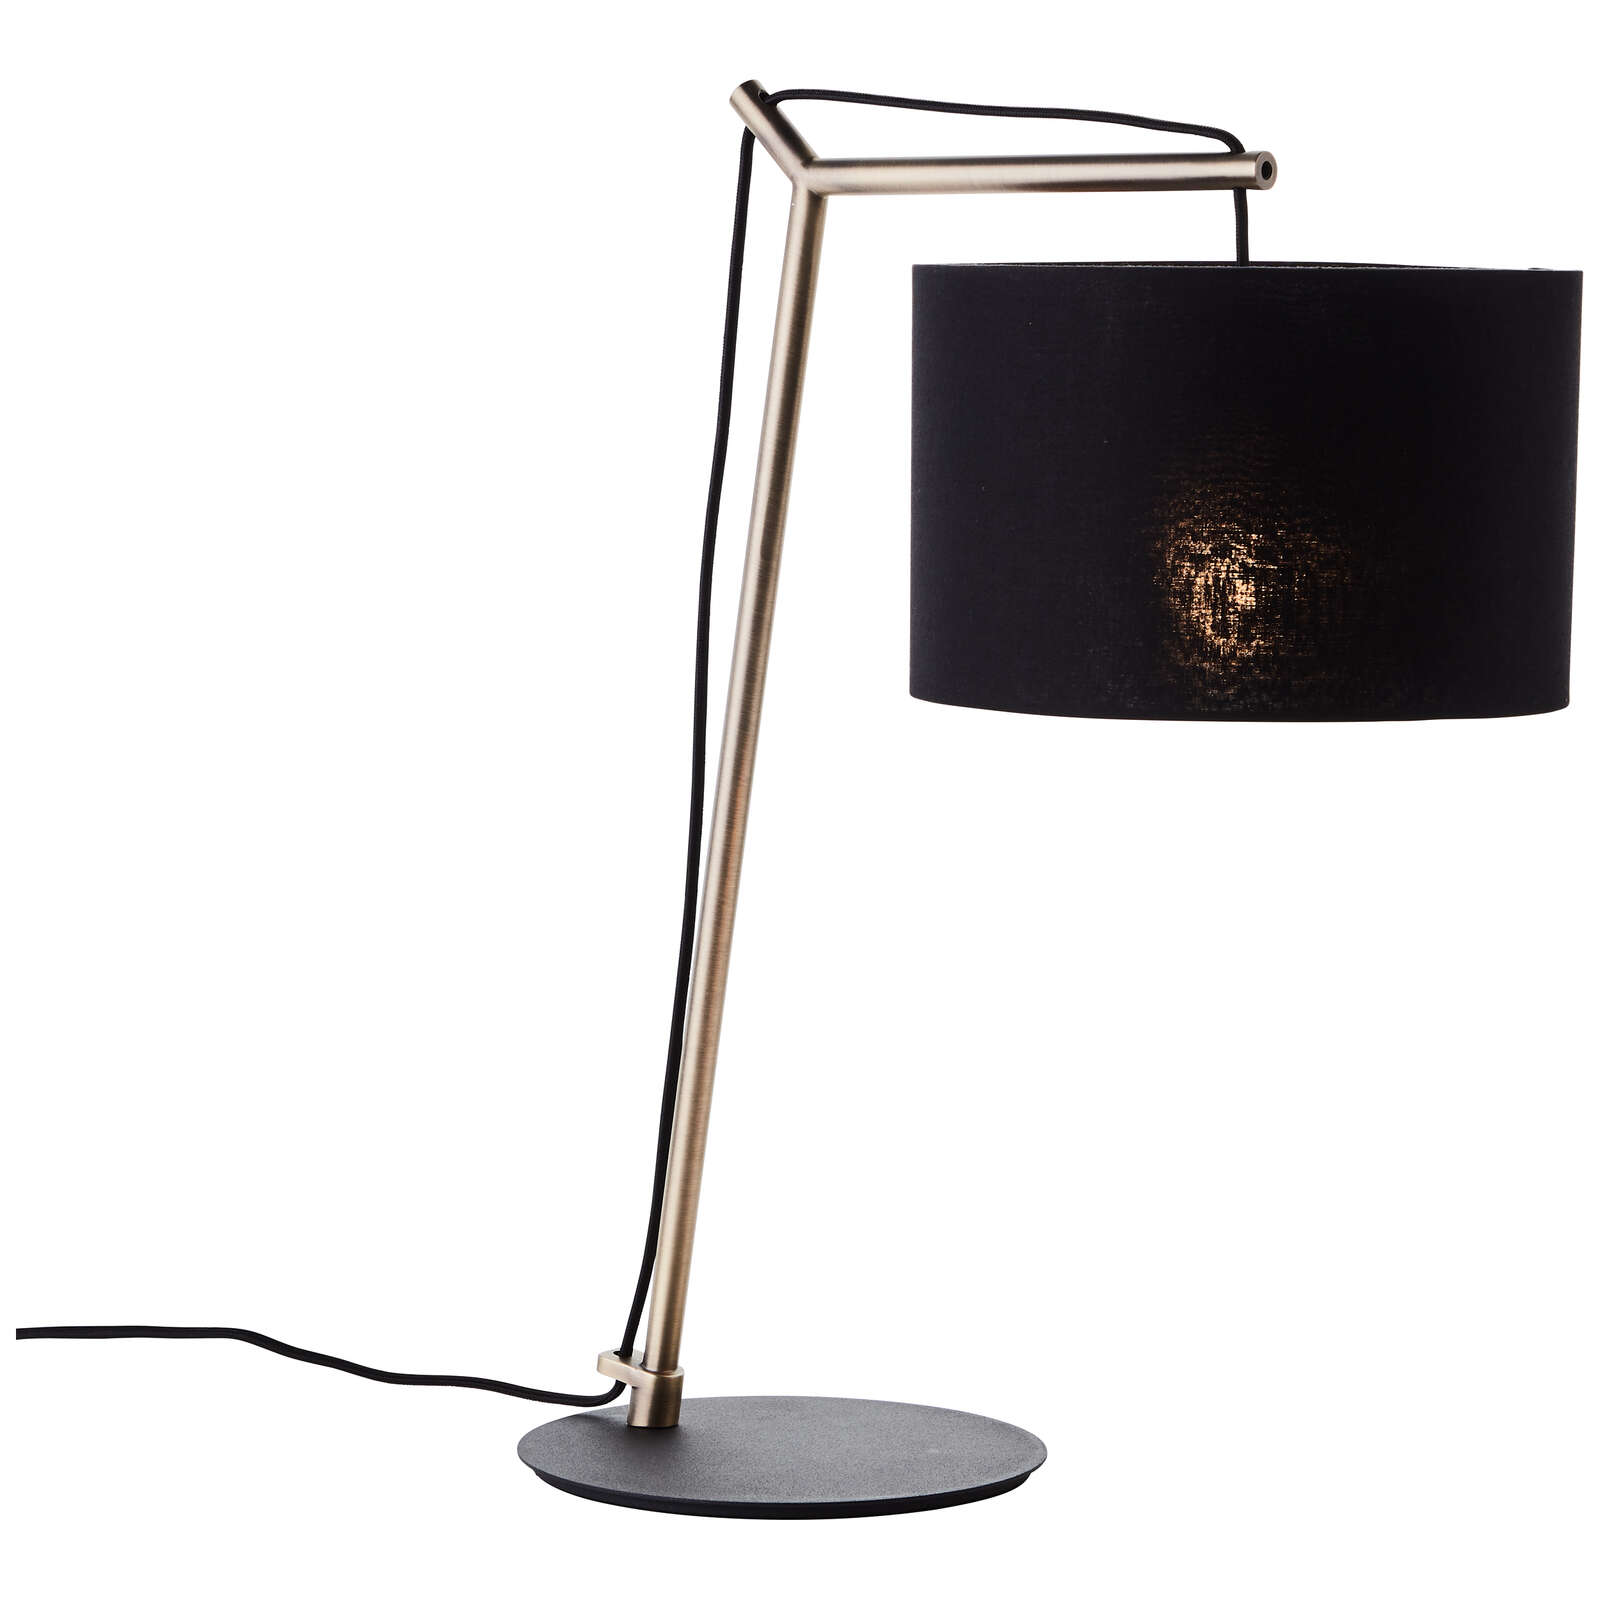             Textile table lamp - Alisa 1 - Gold
        